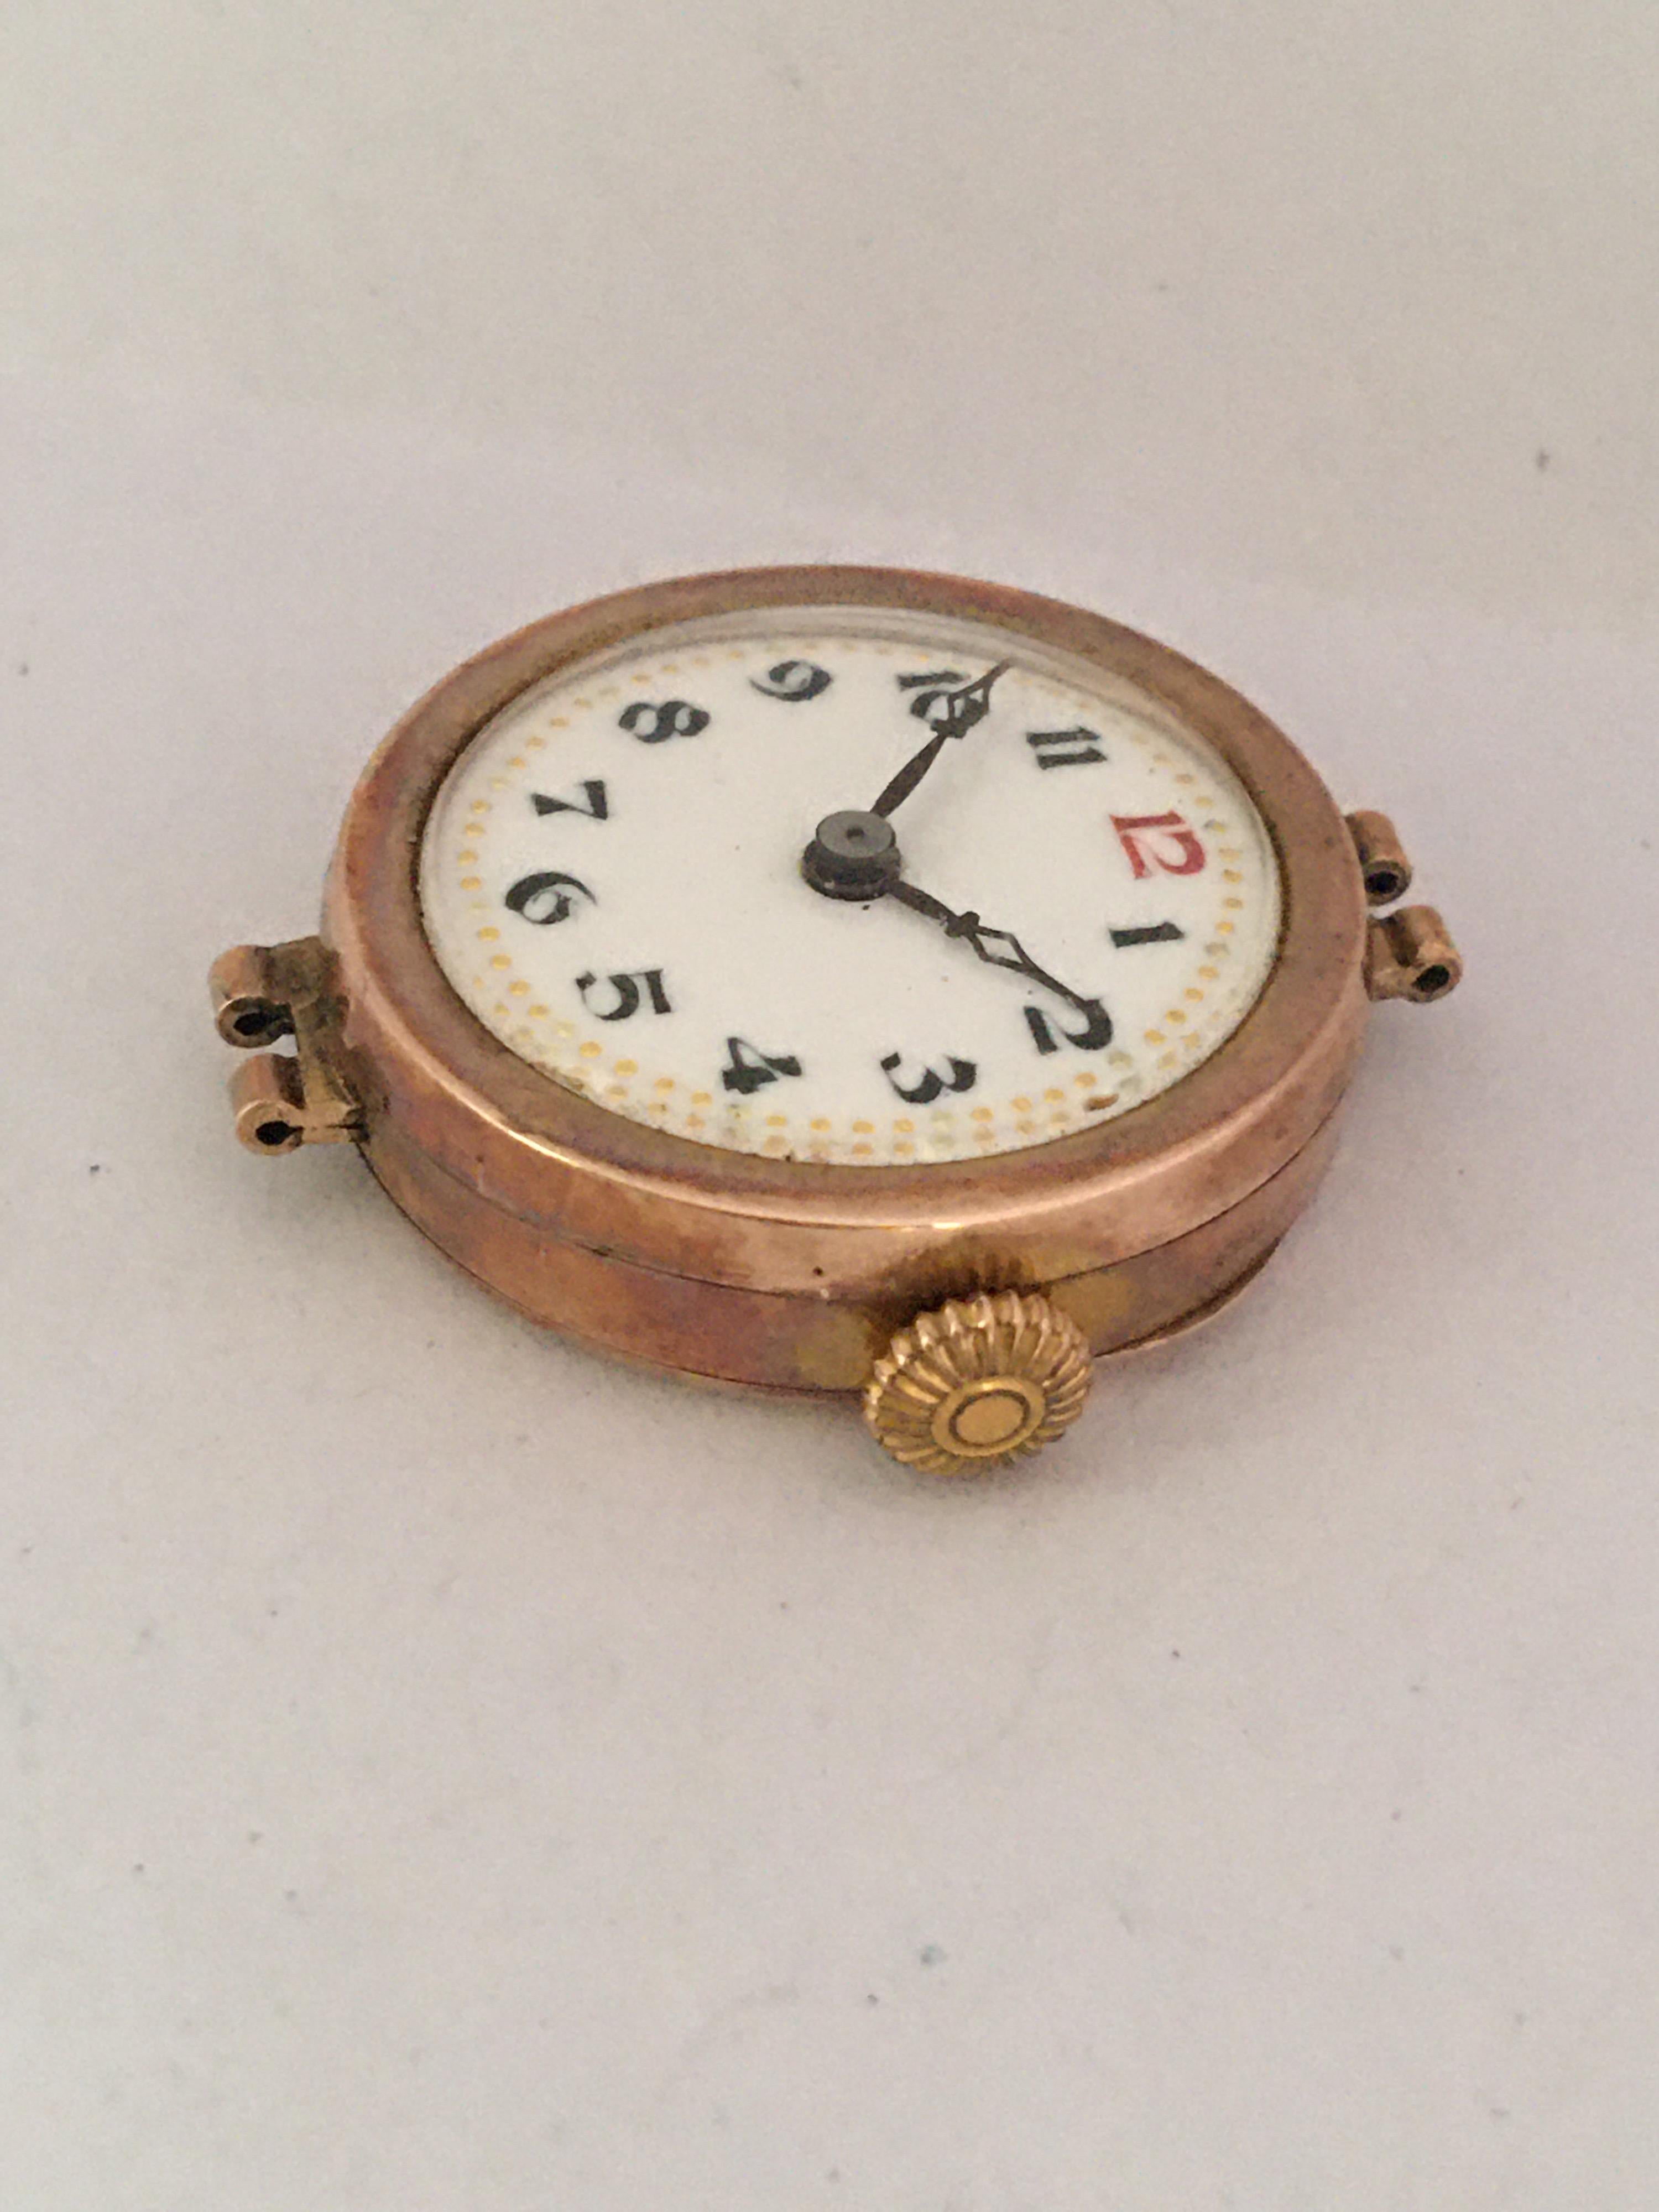 This beautiful pre-owned 26mm diameter antique hand-winding ladies gold watch is in good working condition and it is running well. Visible signs of ageing and wear with light marks on the glass and on the gold watch case as shown. So tiny dents on